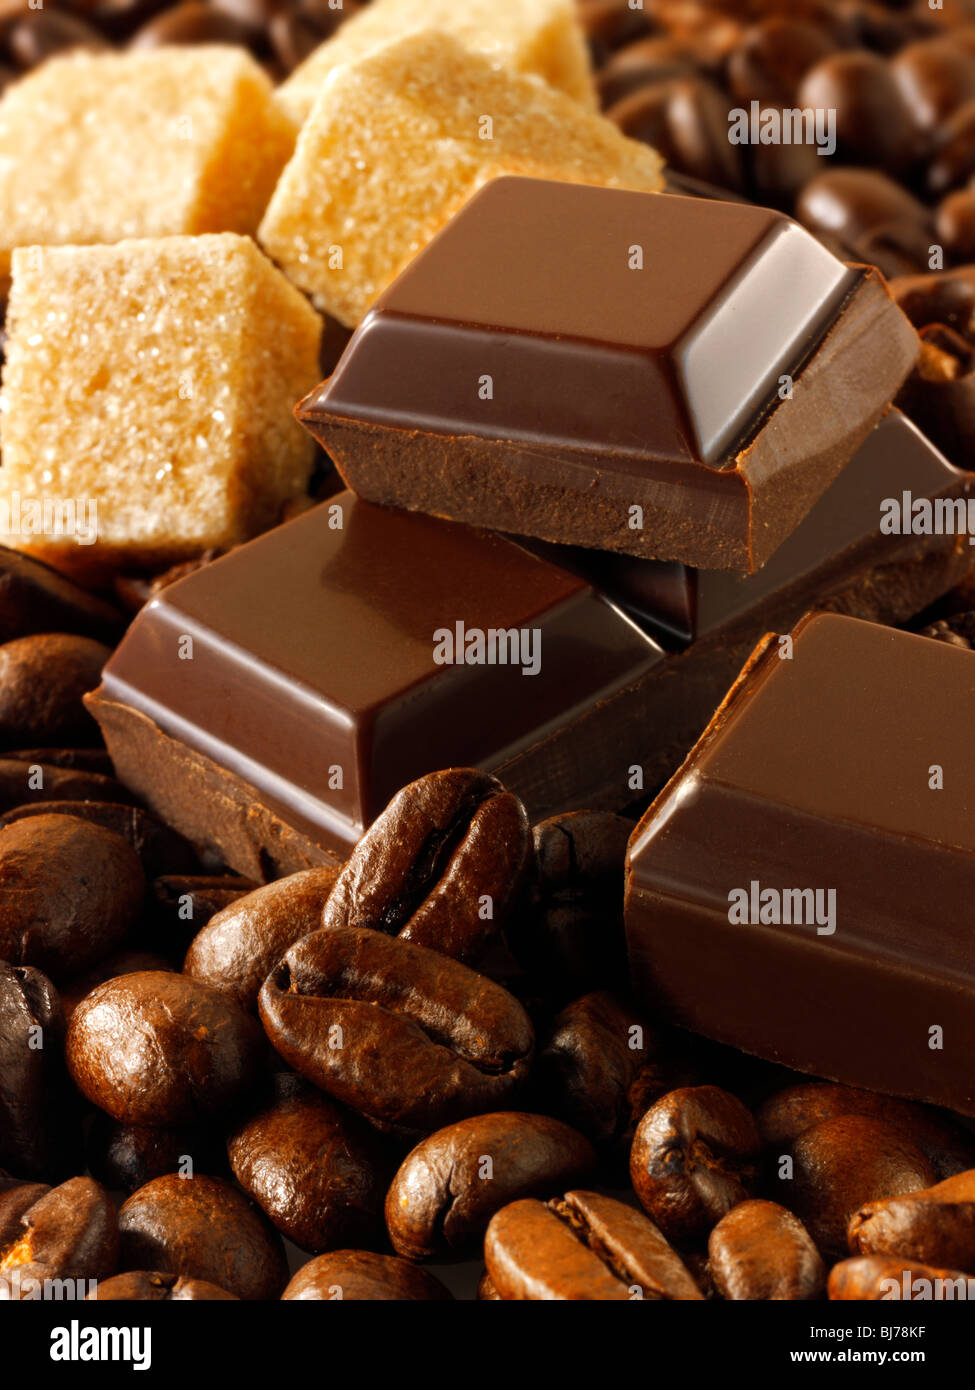 Pieces of chocolate, coffee beans and sugar. Stock Photo Stock Photo